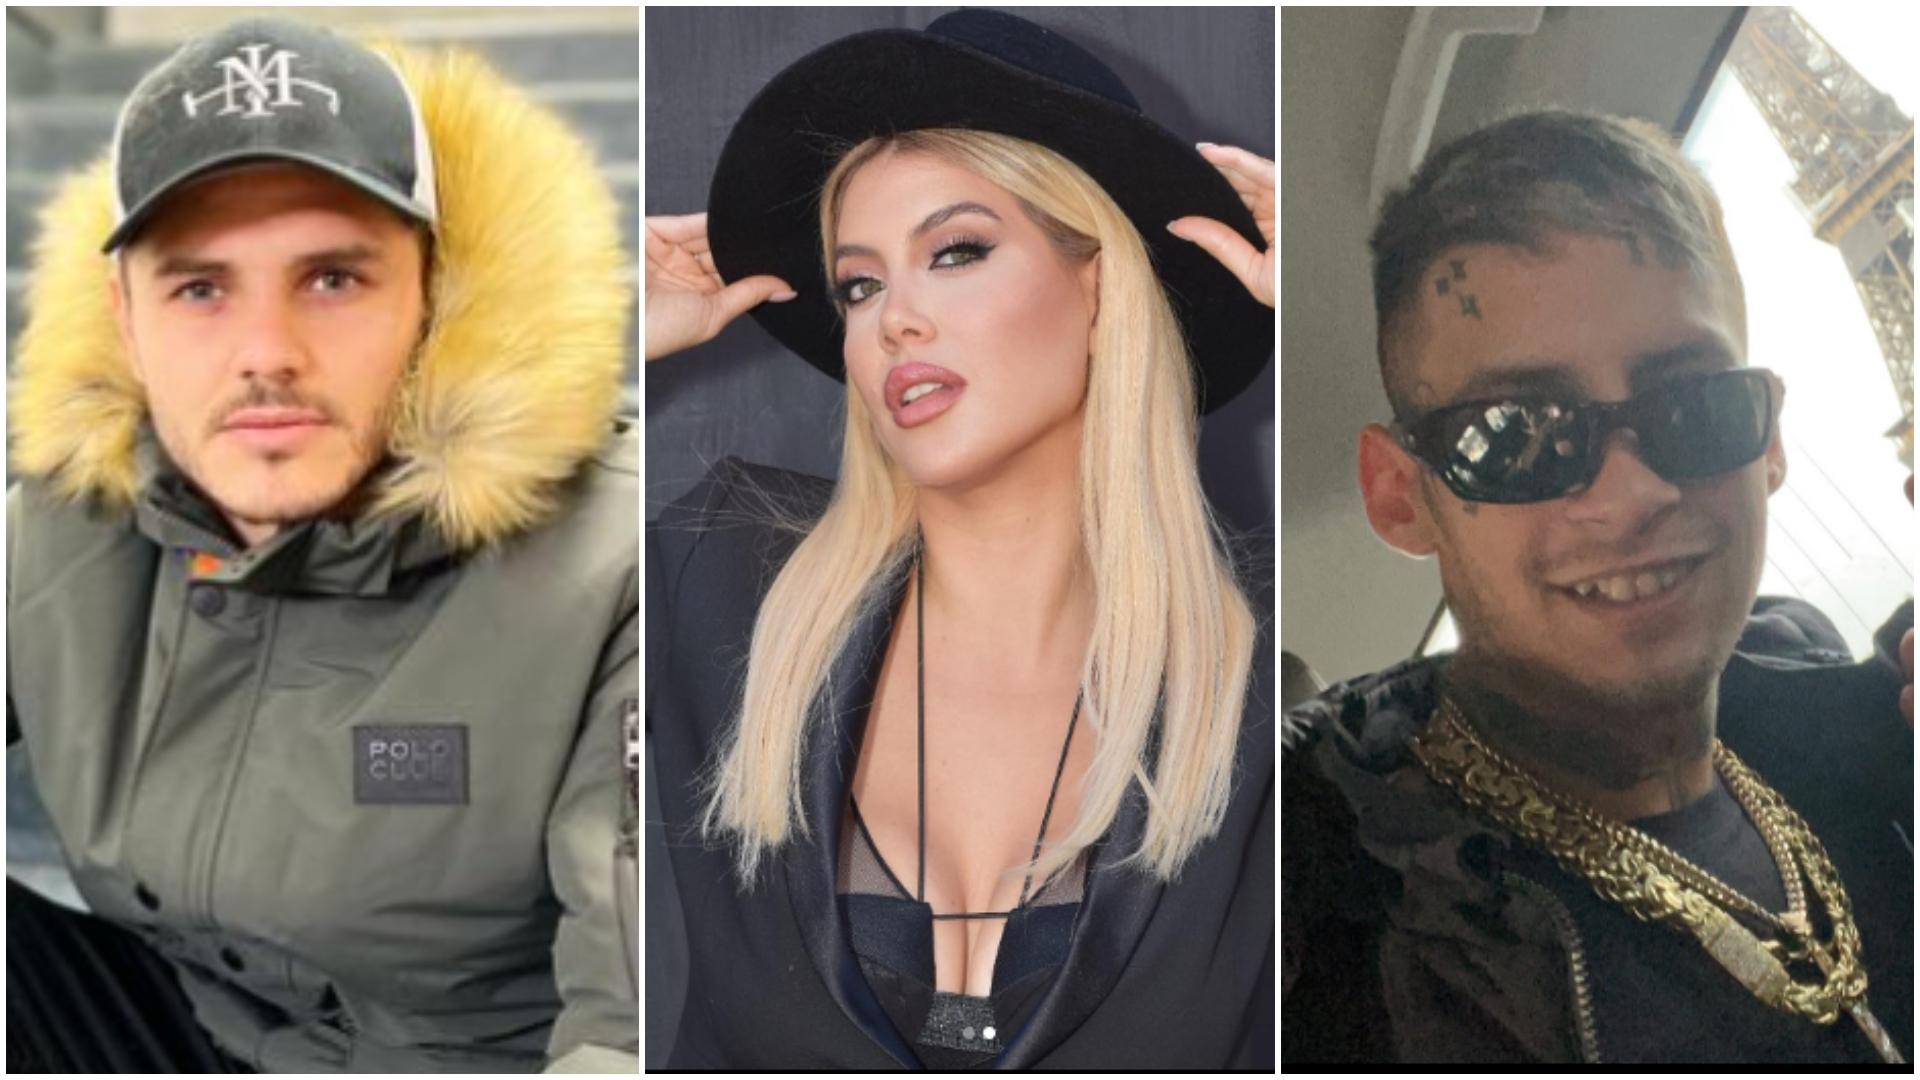 While Rumors Of A Romance Between Wanda Nara And El-Gante Grow, Mauro Icardi Is Still Present On The Businessman'S Social Networks.